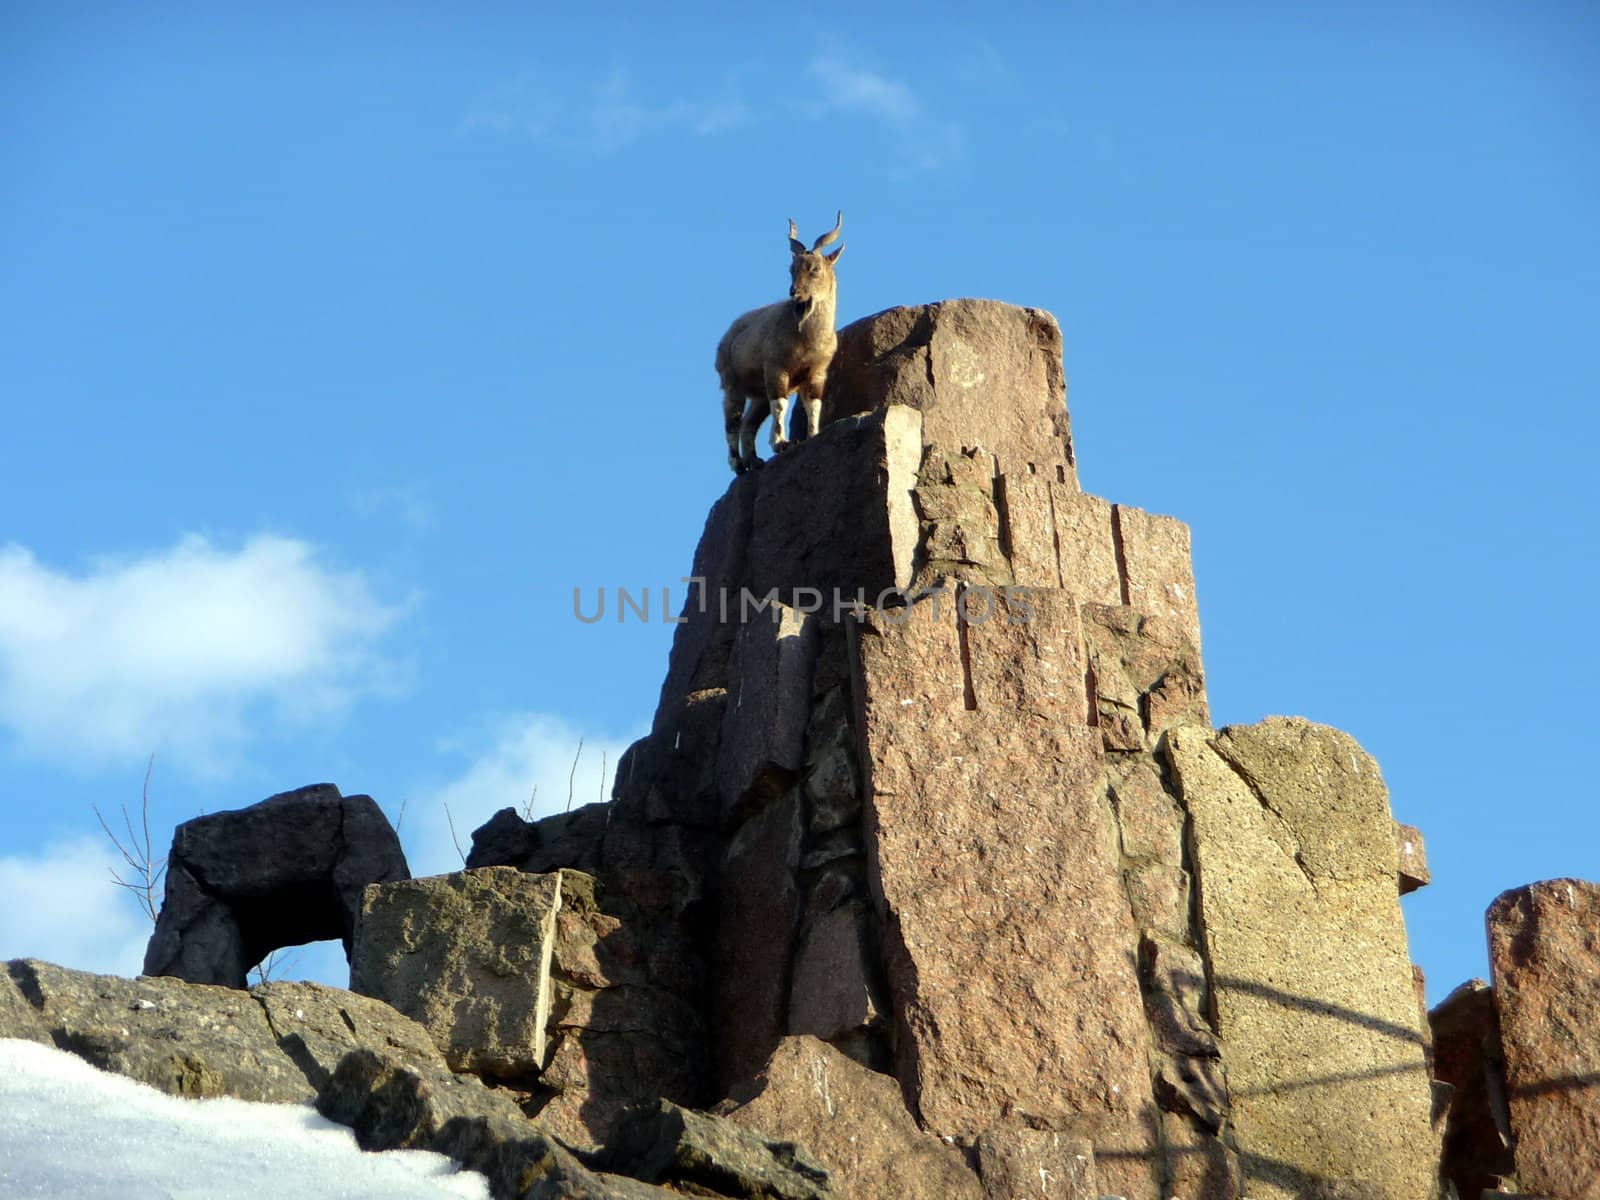 Goat at stone rock on a background of blue sky